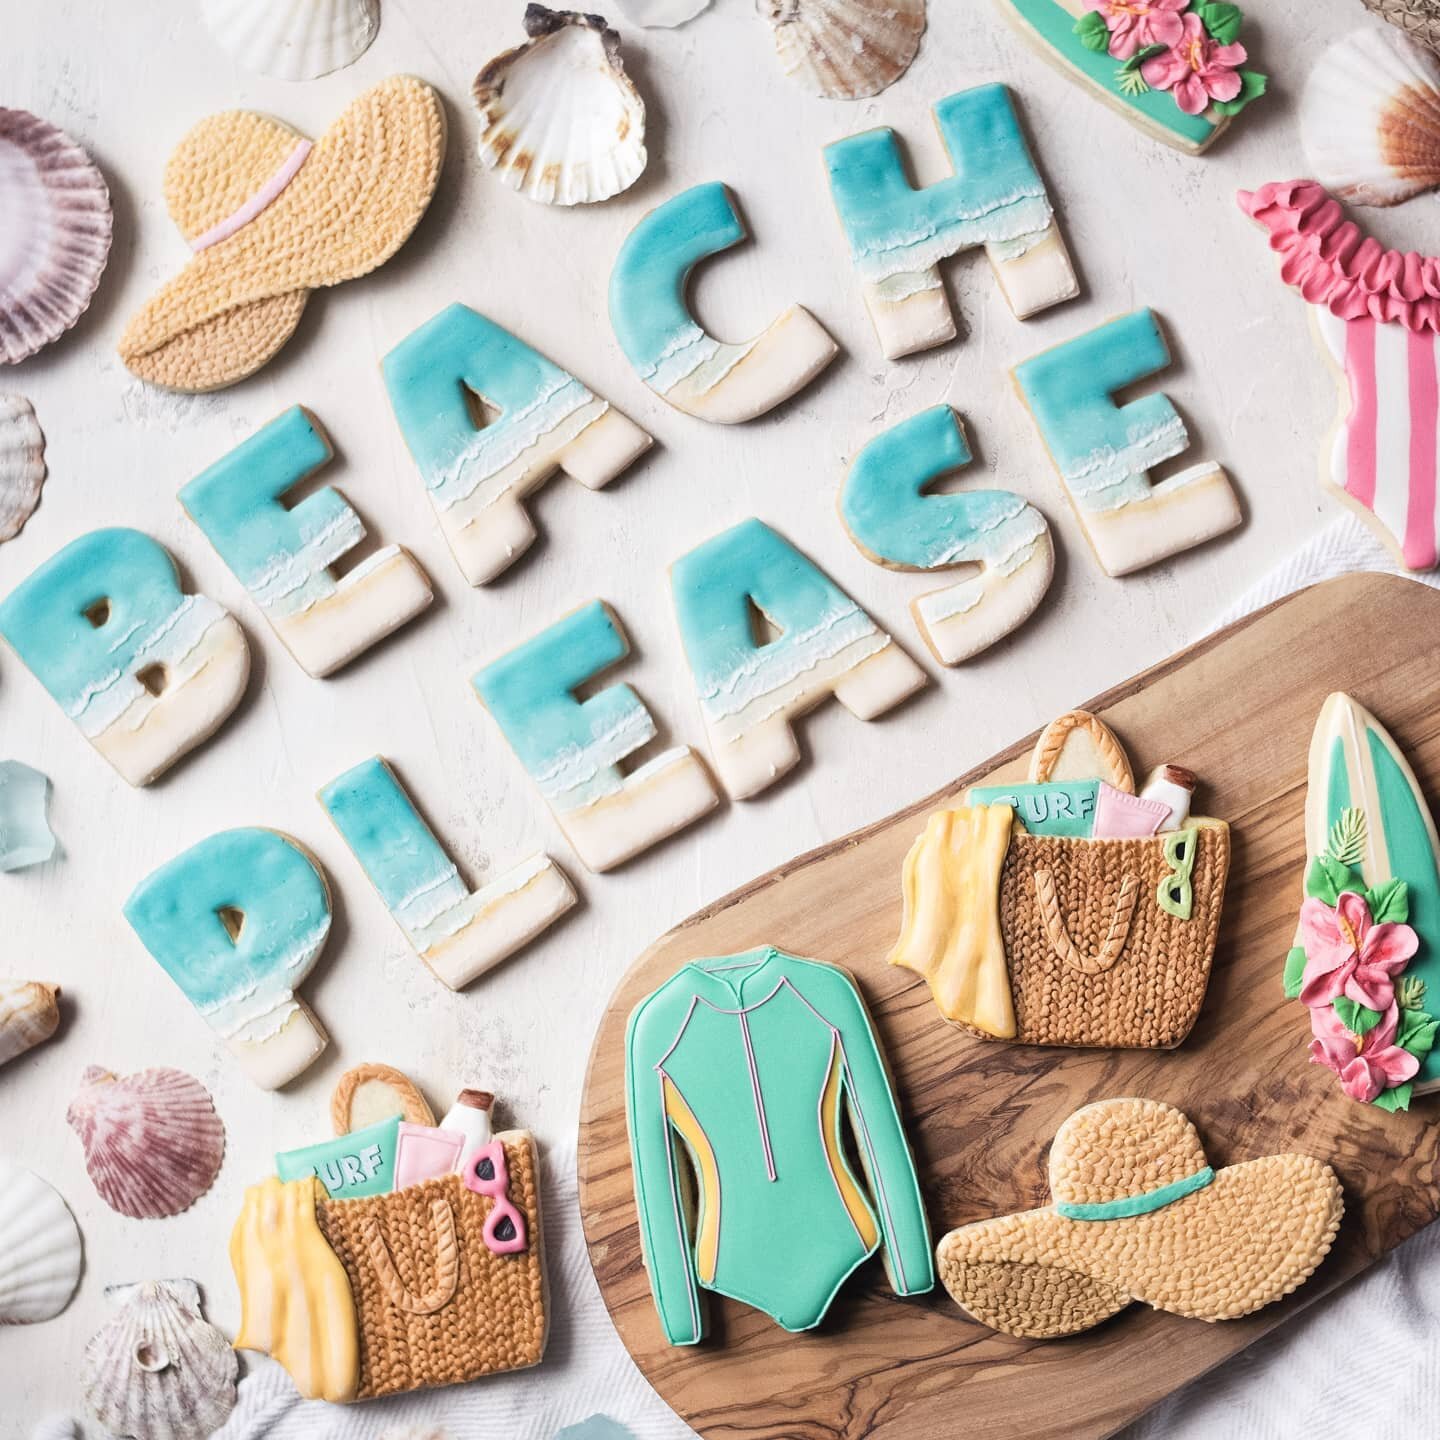 Now that Summer has unofficially begun, I have the beach on my mind. Can you tell?

We don't have any trips to the beach planned, so I will just be channeling my beach energy into cookies!

Since we stayed home for the long weekend, I got a chance to